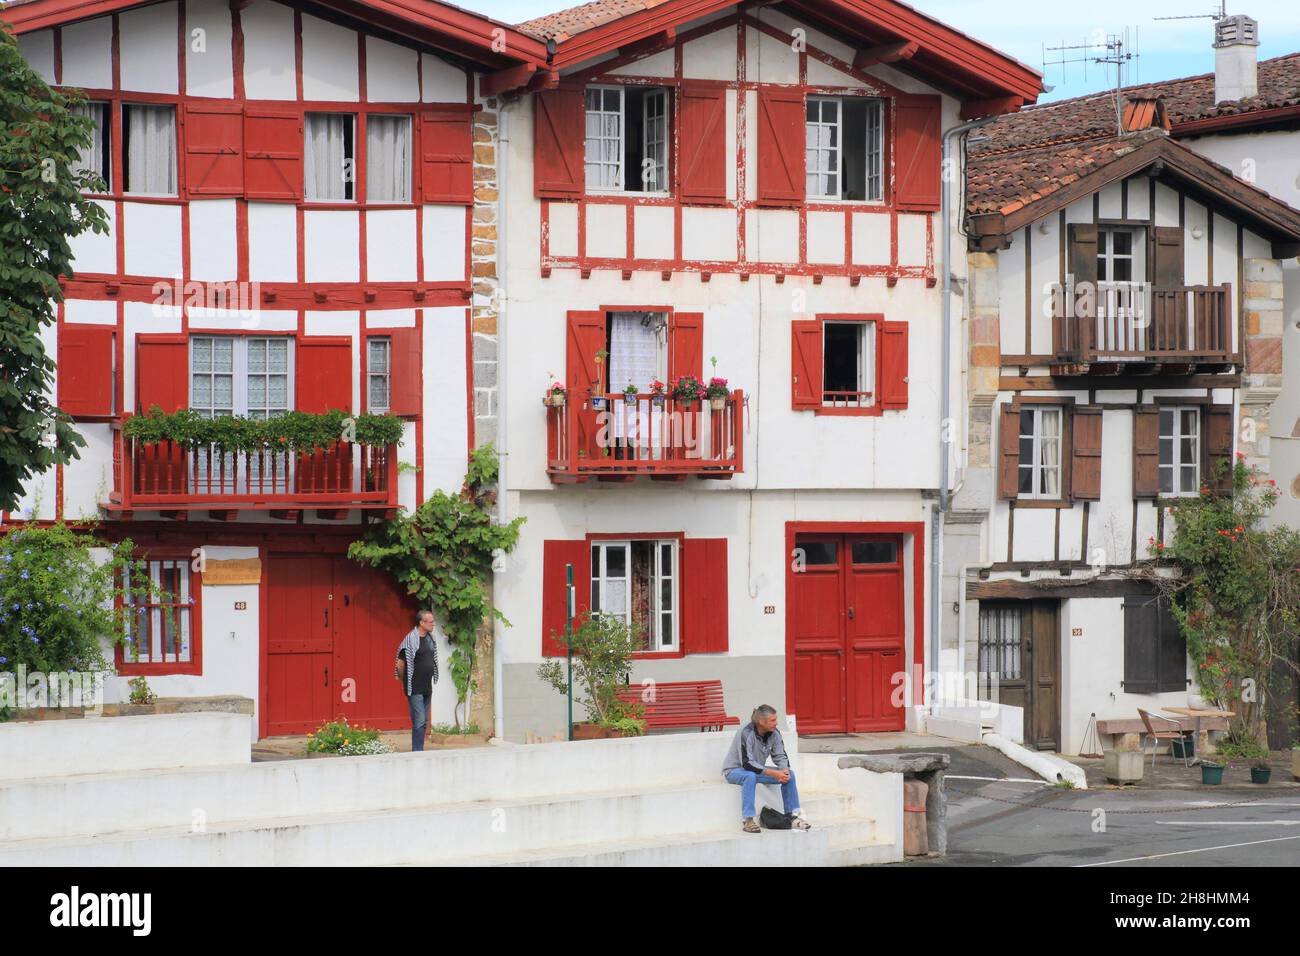 France, Pyrenees Atlantiques, Basque Country, Ainhoa (labeled The most beautiful villages of France), main street, Labourdine houses (18th century) with facades with visible timber framing Stock Photo